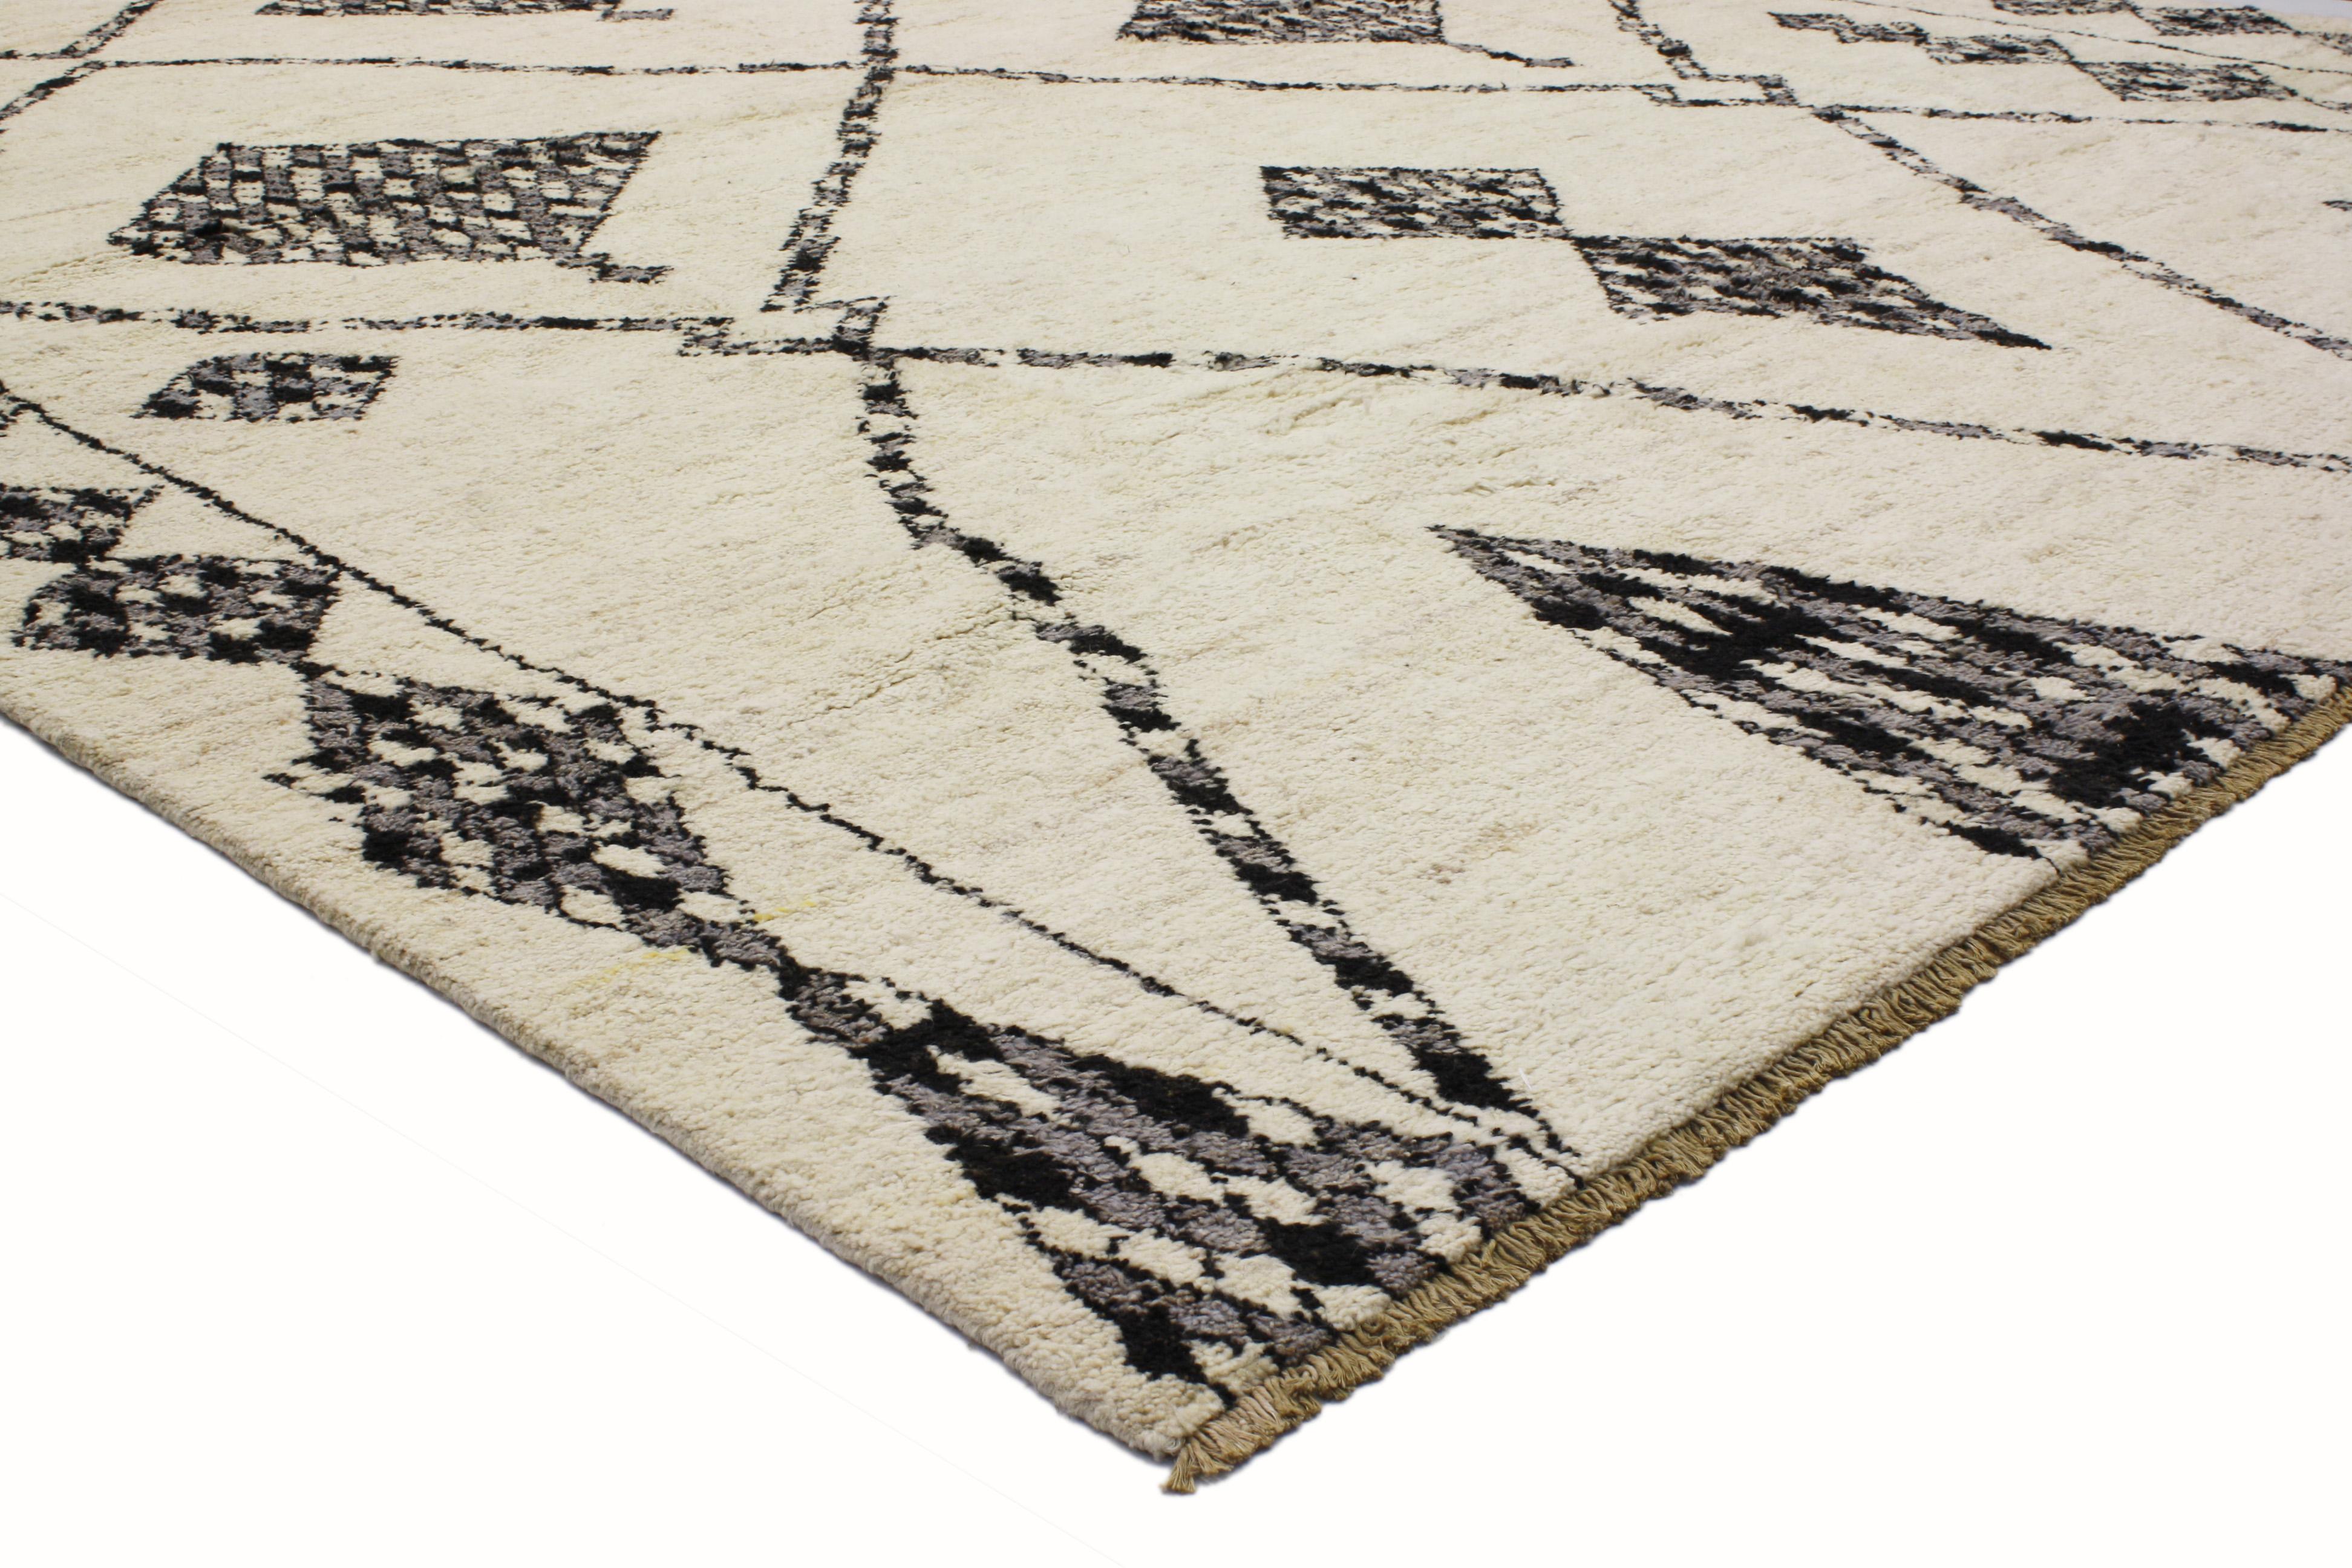 80337 New Contemporary Moroccan Style rug with Boho Chic Hygge Vibes 10'03 x 13'02. With its simplicity, plush pile and Hygge vibes, this hand knotted wool contemporary Moroccan style area rug provides a feeling of cozy contentment without the